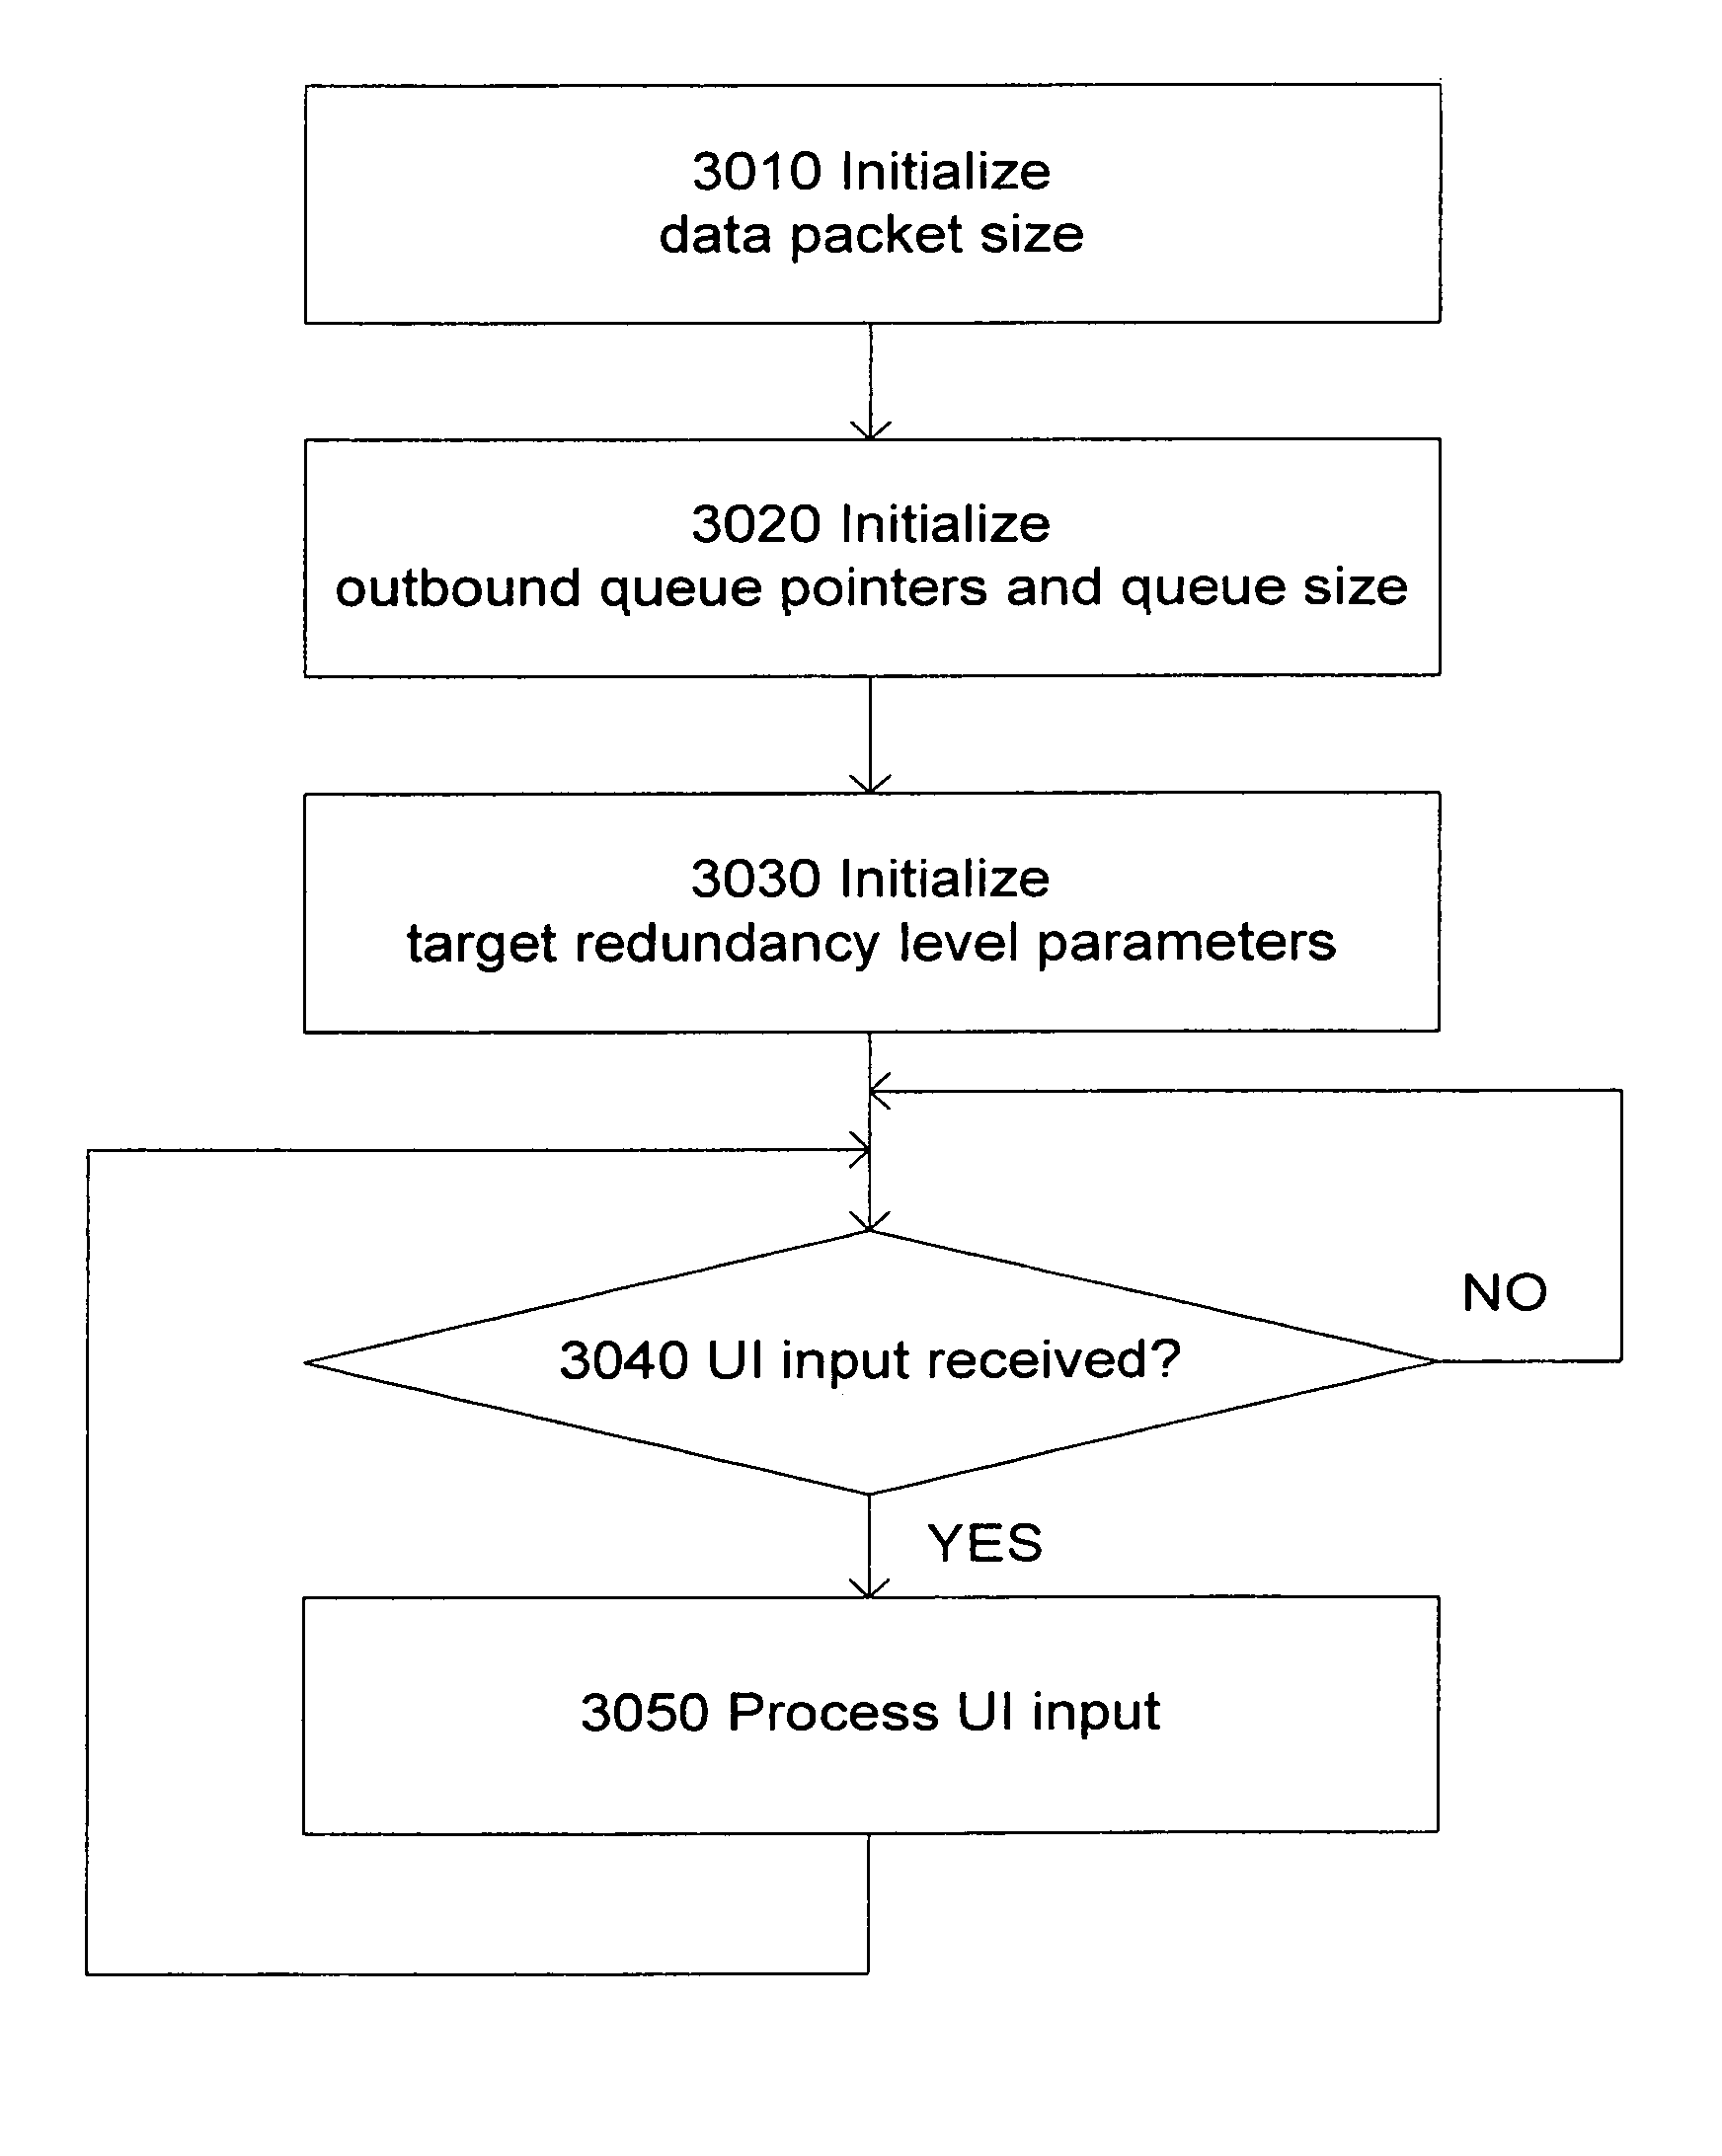 System and method for reliable store-and-forward data handling by encoded information reading terminals